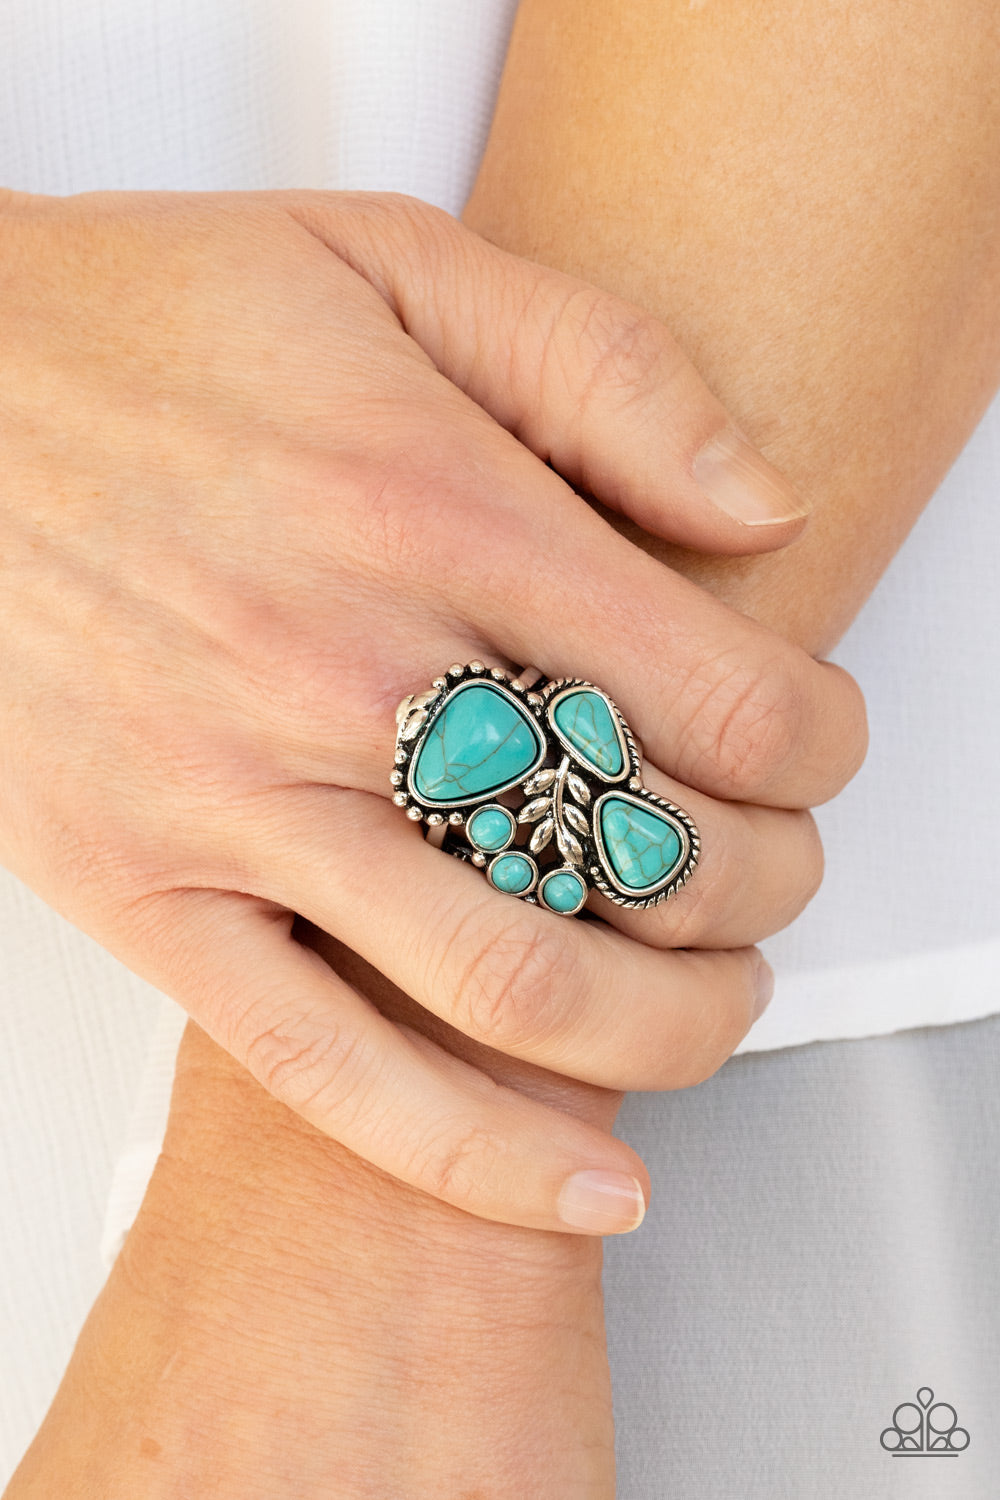 Mystical Mesa - Blue Turquoise - Silver Ring - Paparazzi Accessories - Round and teardrop shapes, a refreshing collection of turquoise stones gather around a leafy silver accent, creating a whimsical center atop the finger. Features a stretchy band for a flexible fit.